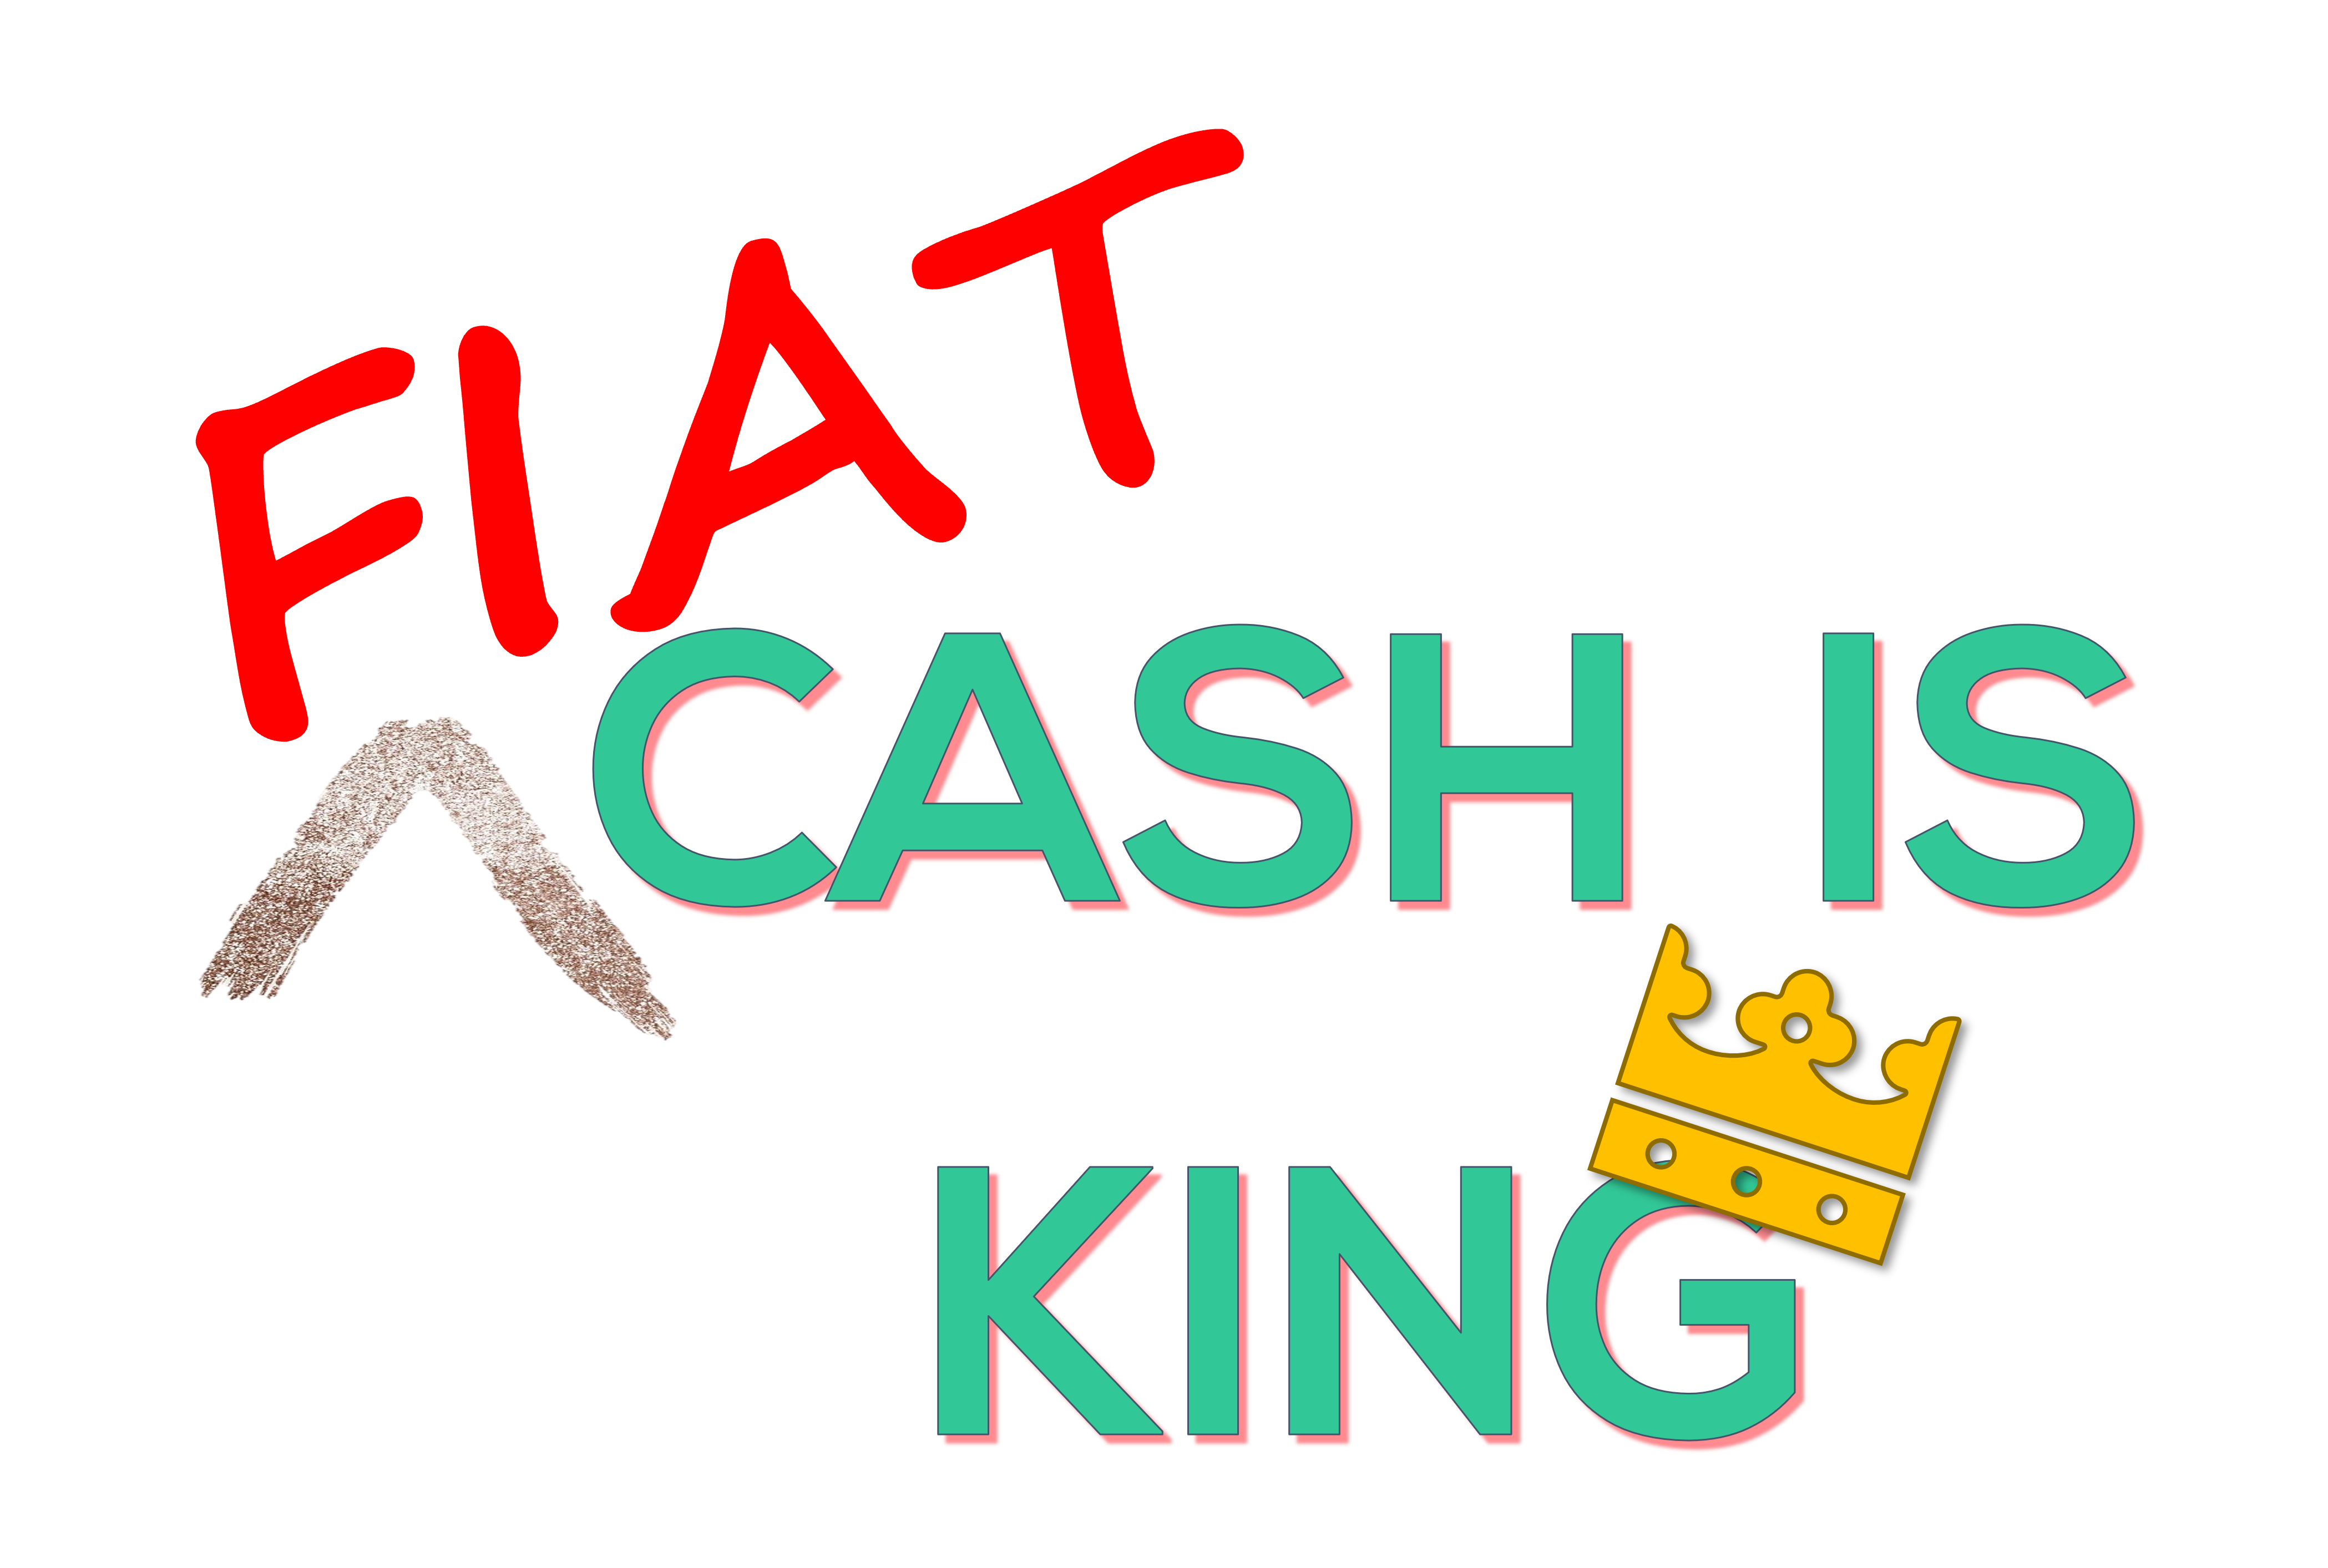 Cash is King not tokens